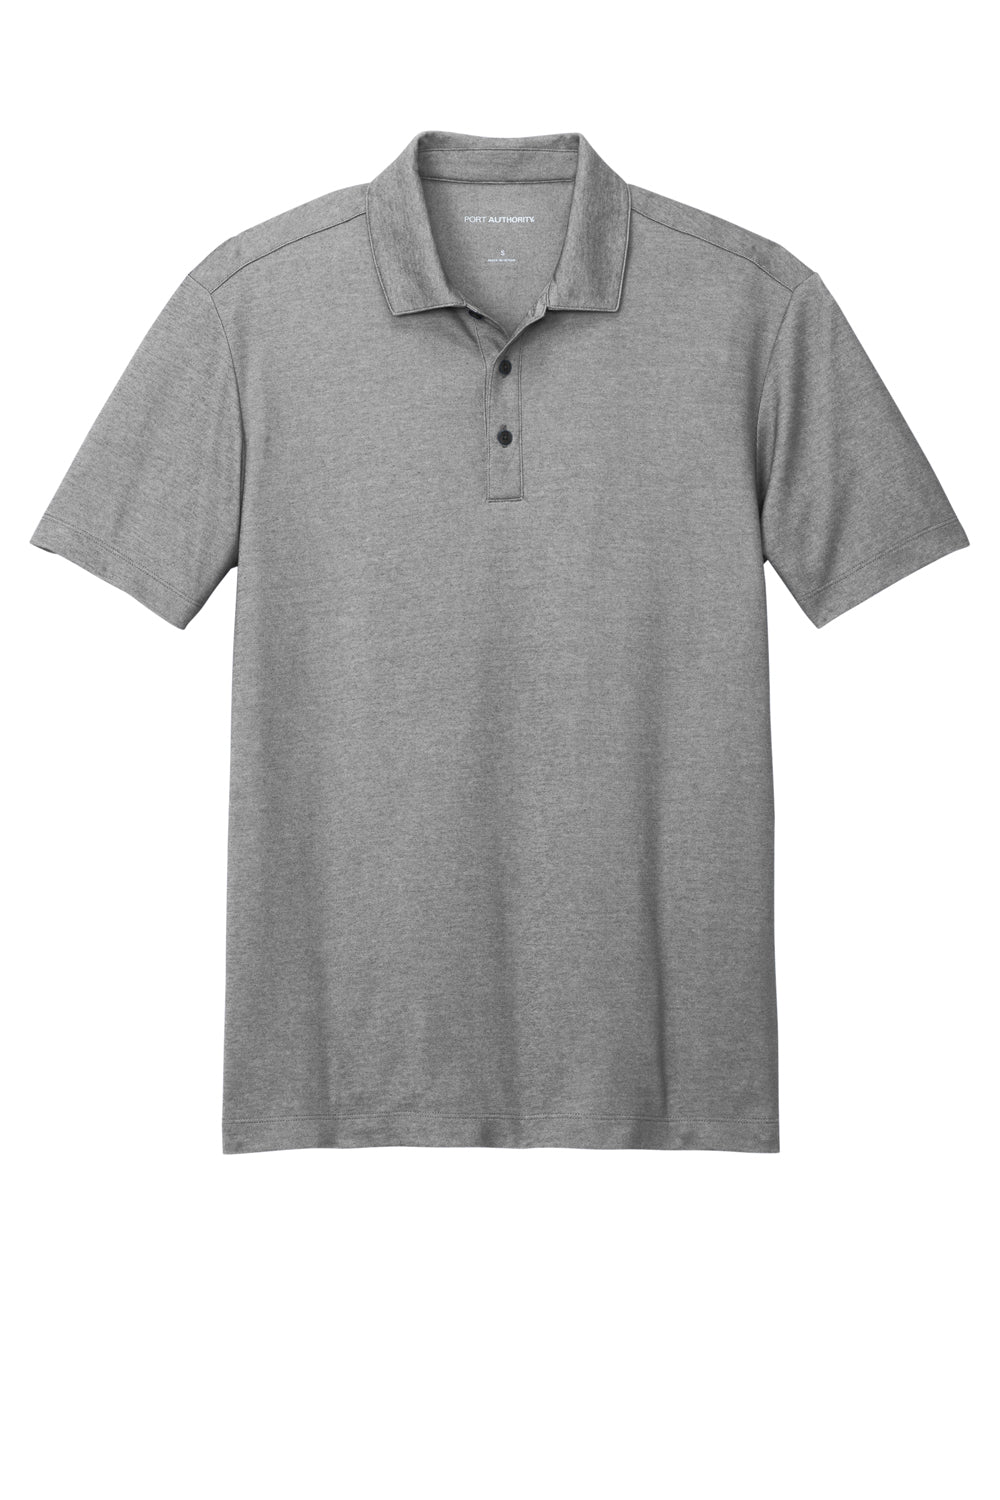 Port Authority Mens Fine Pique Short Sleeve Polo Shirt Heather Charcoal Grey Flat Front